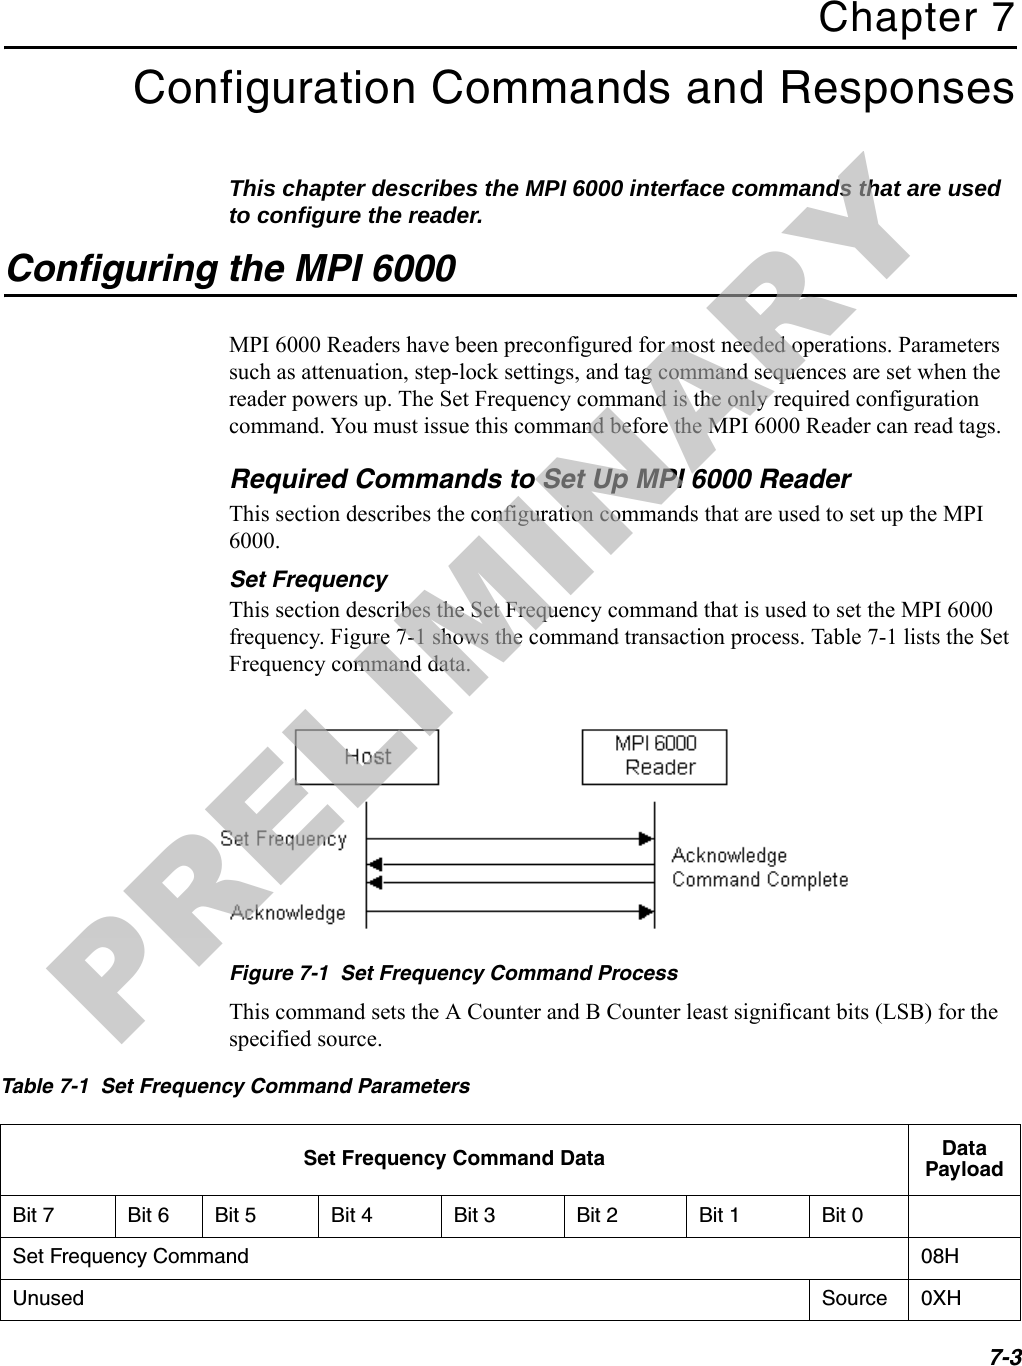 7-3Chapter 7Configuration Commands and ResponsesThis chapter describes the MPI 6000 interface commands that are used to configure the reader.Configuring the MPI 6000MPI 6000 Readers have been preconfigured for most needed operations. Parameters such as attenuation, step-lock settings, and tag command sequences are set when the reader powers up. The Set Frequency command is the only required configuration command. You must issue this command before the MPI 6000 Reader can read tags.Required Commands to Set Up MPI 6000 ReaderThis section describes the configuration commands that are used to set up the MPI 6000.Set FrequencyThis section describes the Set Frequency command that is used to set the MPI 6000 frequency. Figure 7-1 shows the command transaction process. Table 7-1 lists the Set Frequency command data.Figure 7-1  Set Frequency Command ProcessThis command sets the A Counter and B Counter least significant bits (LSB) for the specified source.Table 7-1  Set Frequency Command ParametersSet Frequency Command Data Data PayloadBit 7 Bit 6 Bit 5 Bit 4 Bit 3 Bit 2 Bit 1 Bit 0Set Frequency Command 08HUnused Source 0XHPRELIMINARY